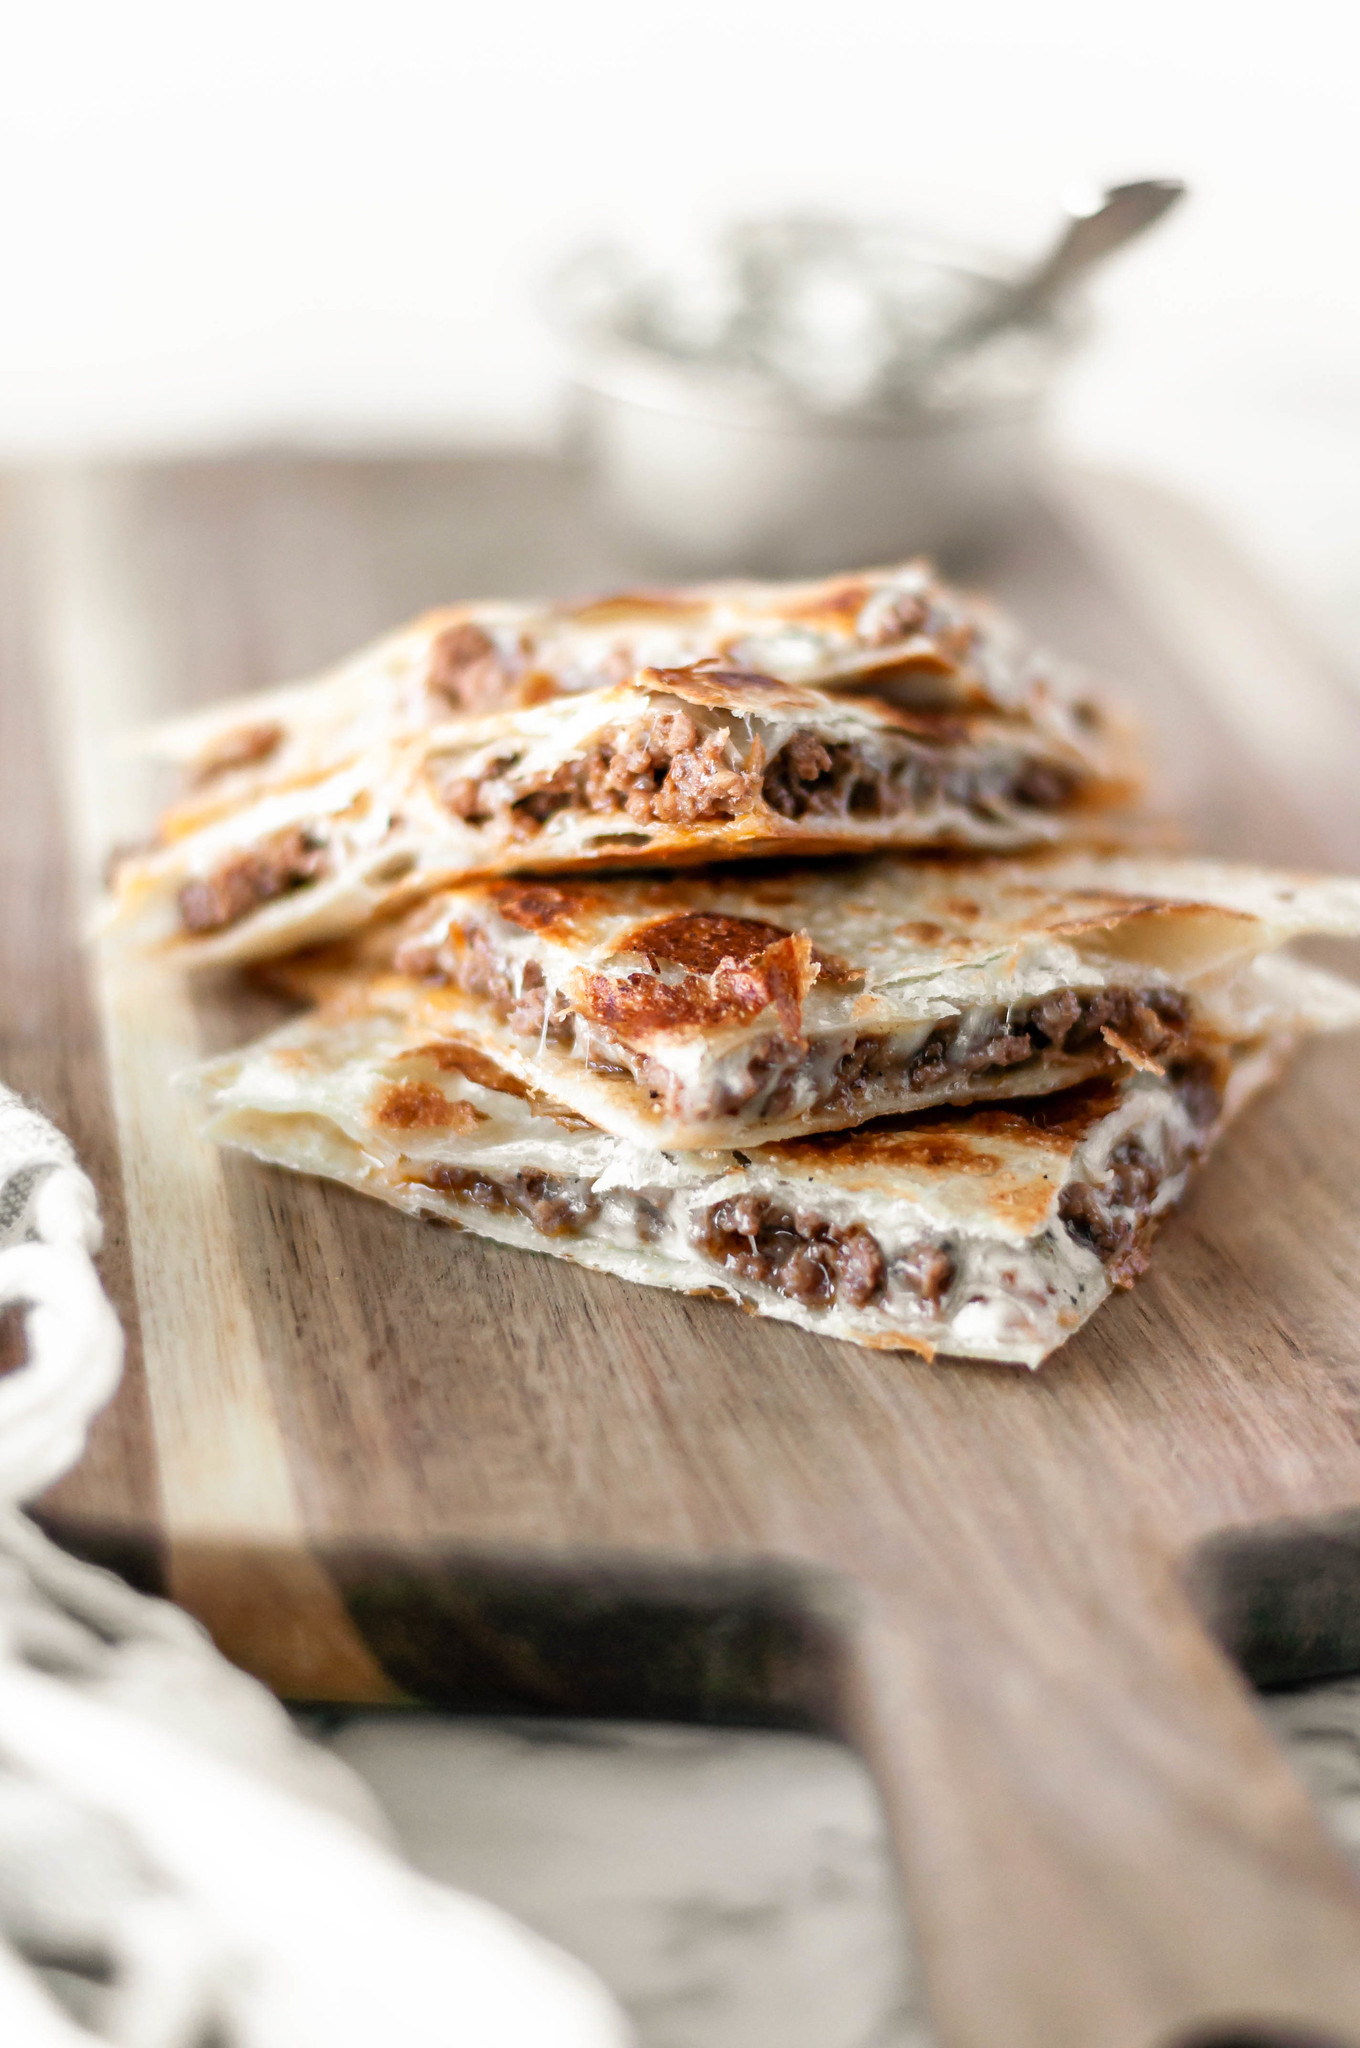 Black and Blue Quesadillas are packed with steak sauce drenched ground beef, blue cheese crumbles and stringy mozzarella. The perfect 30 minute meal for busy weeknights.